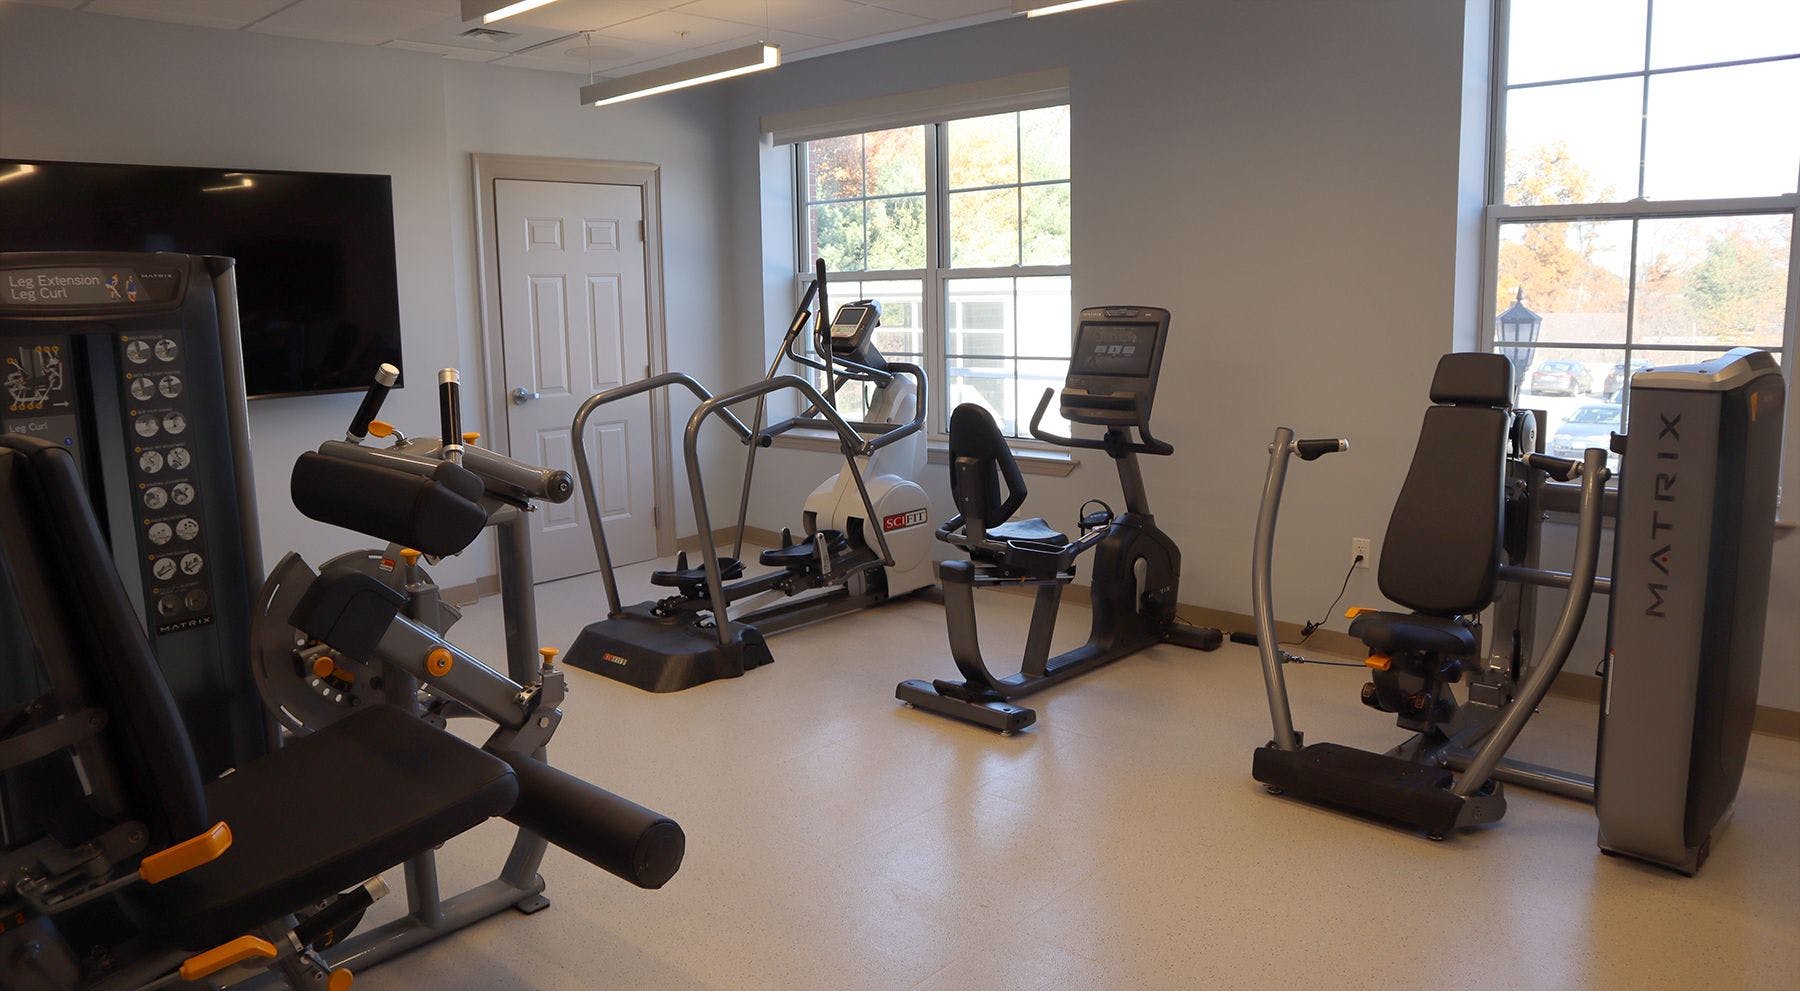 du Lac Fitness Room